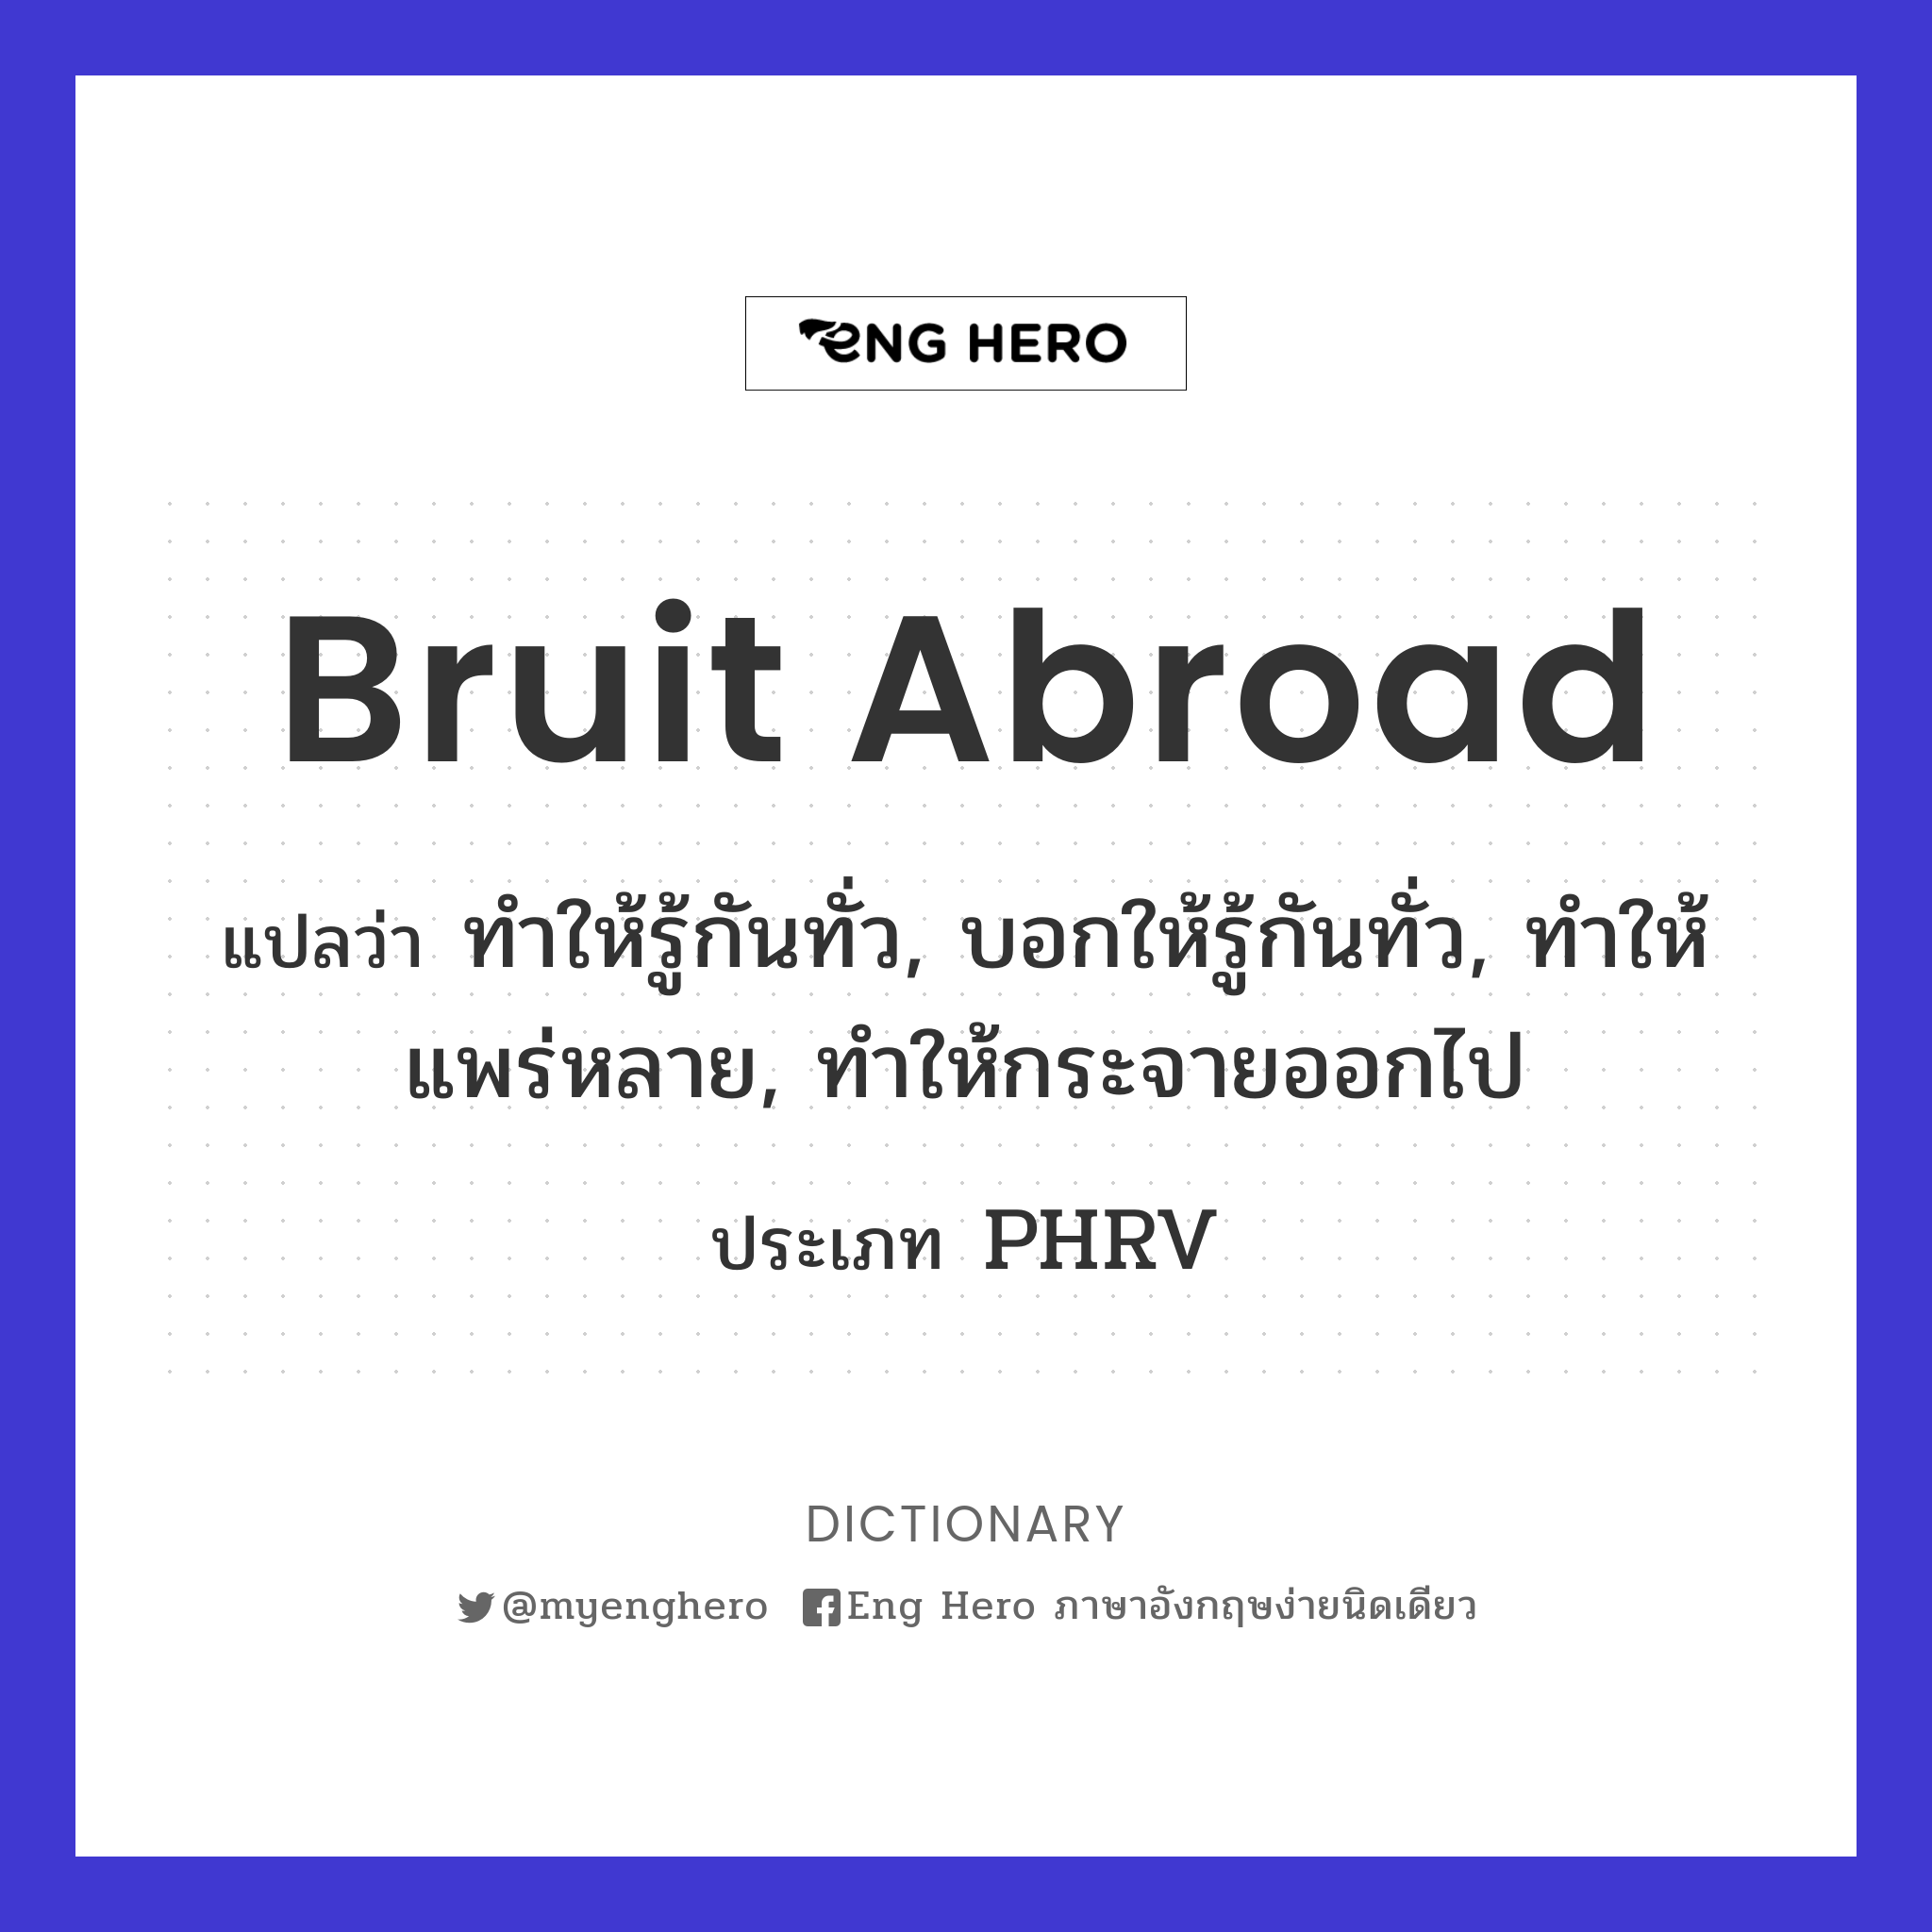 bruit abroad